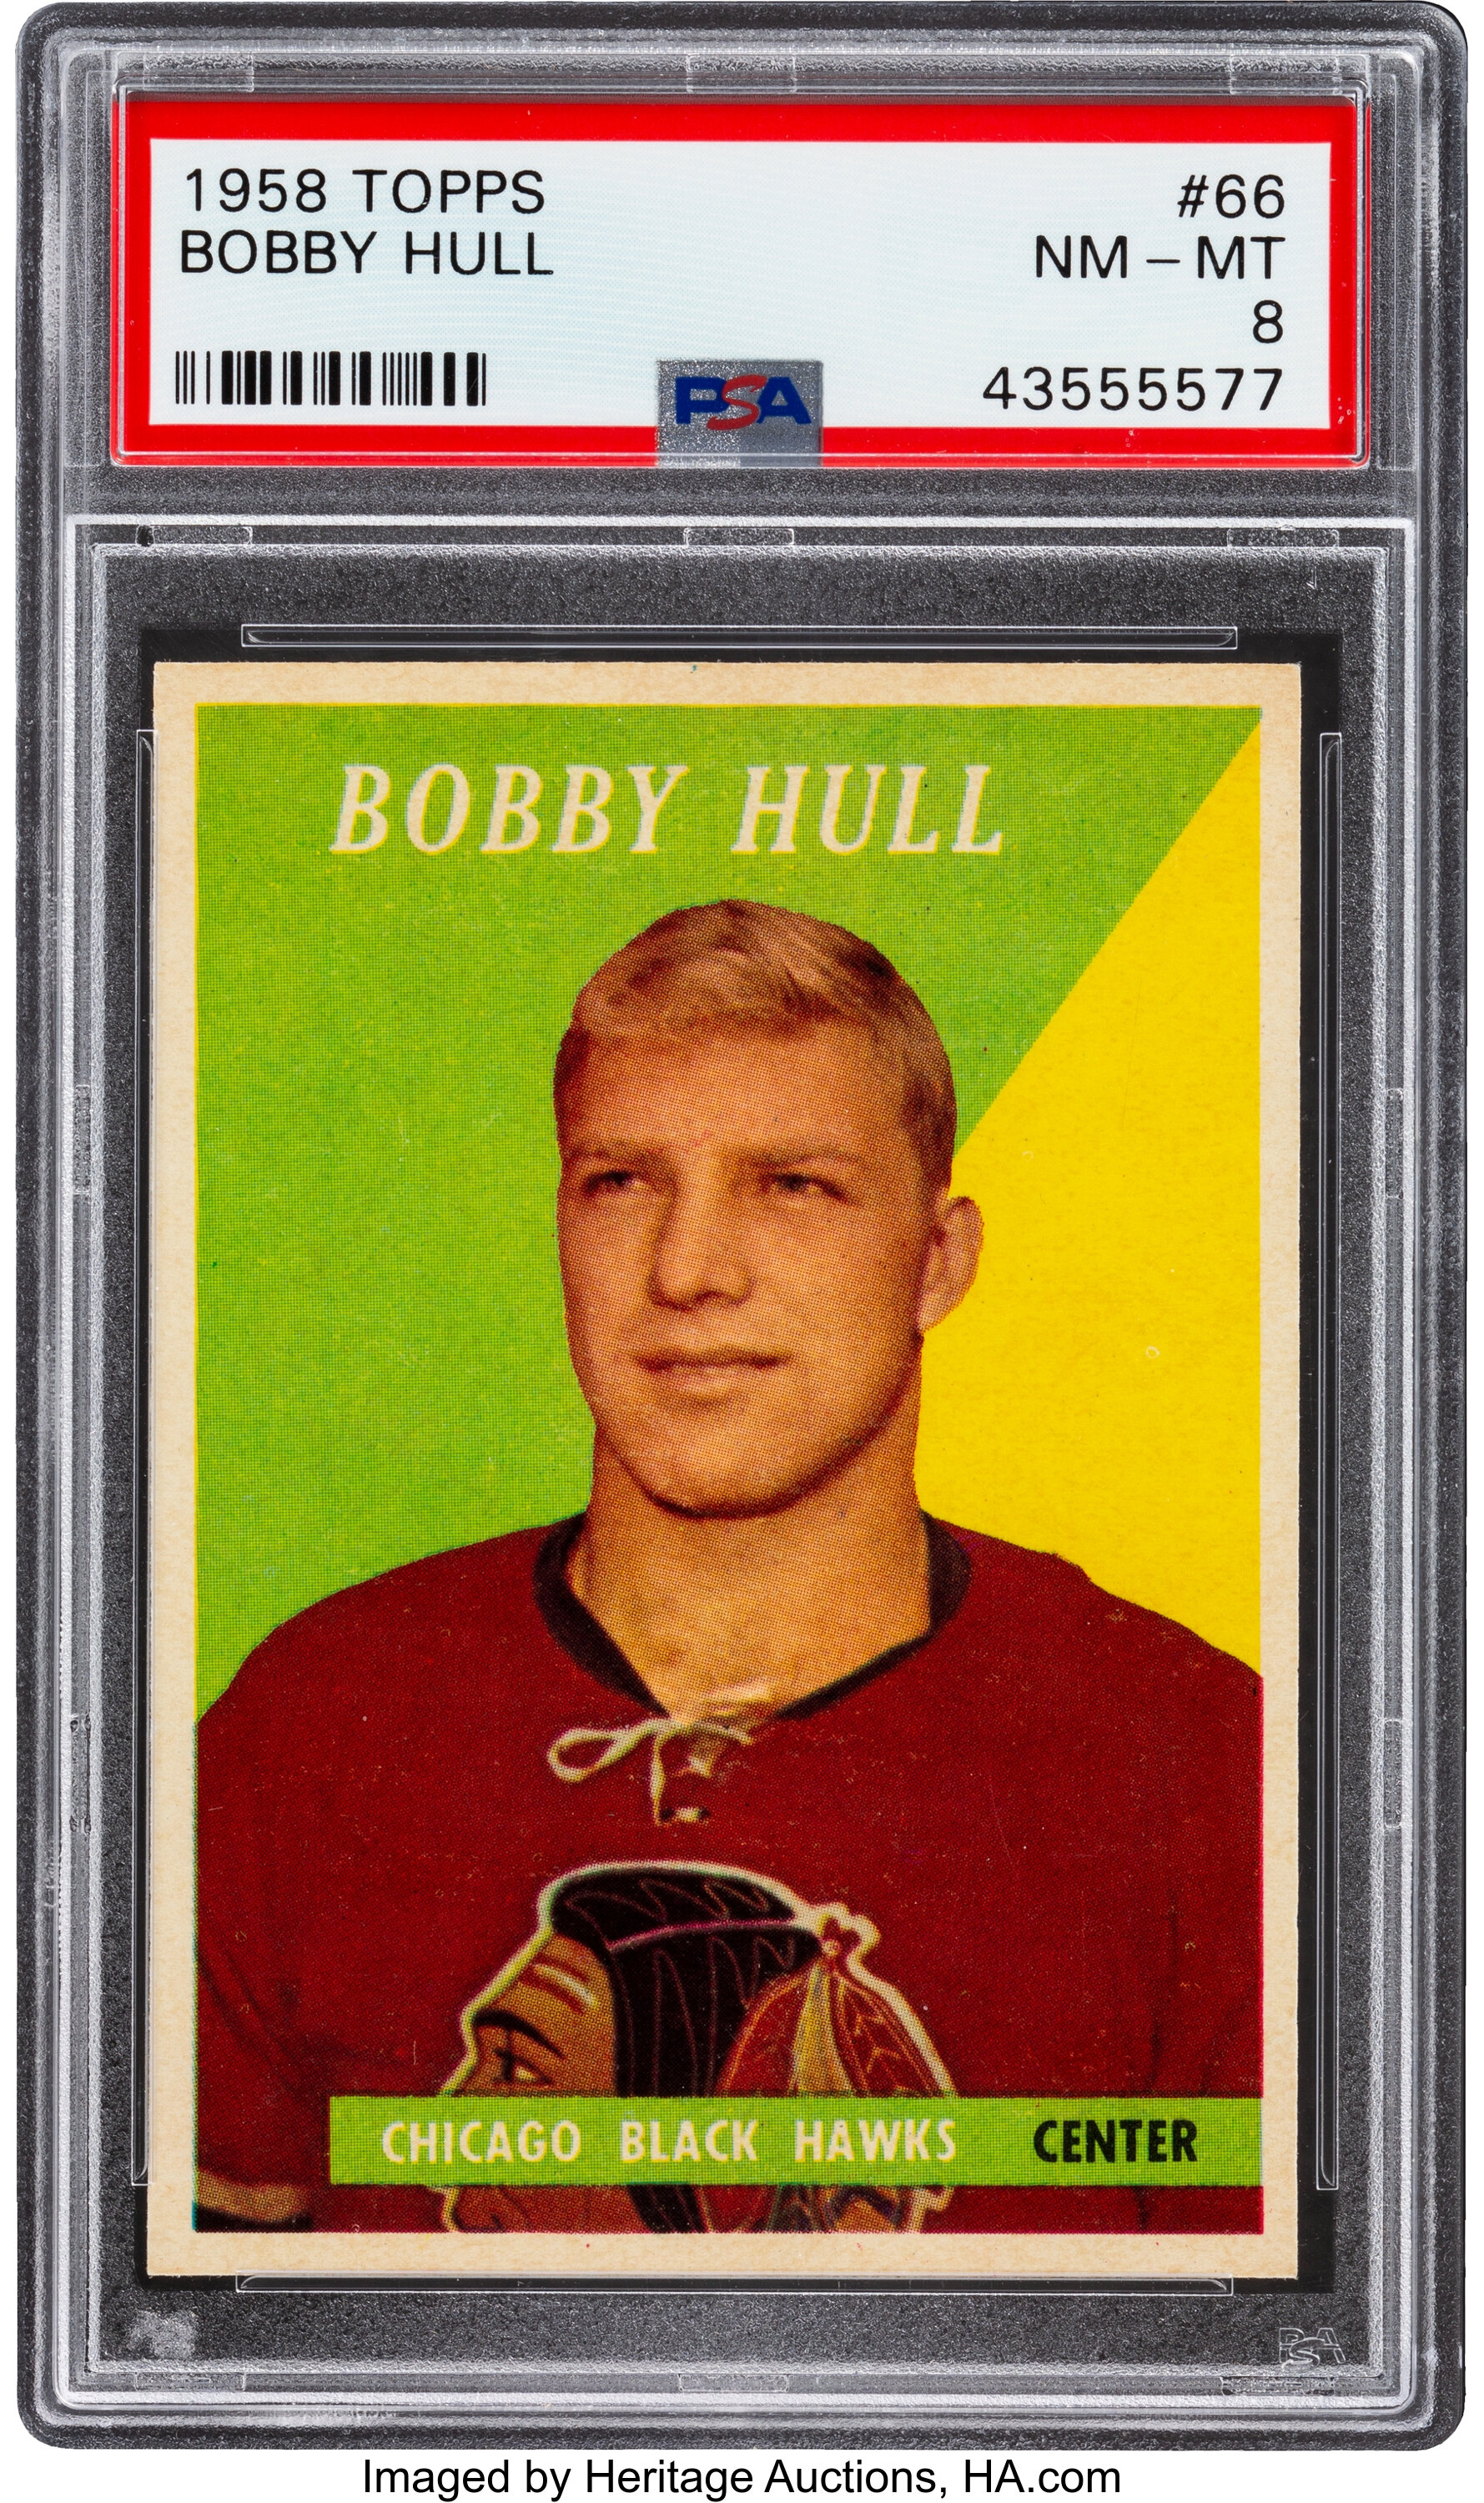 10 Most Valuable Hockey Cards From 22,000 To SixFigures